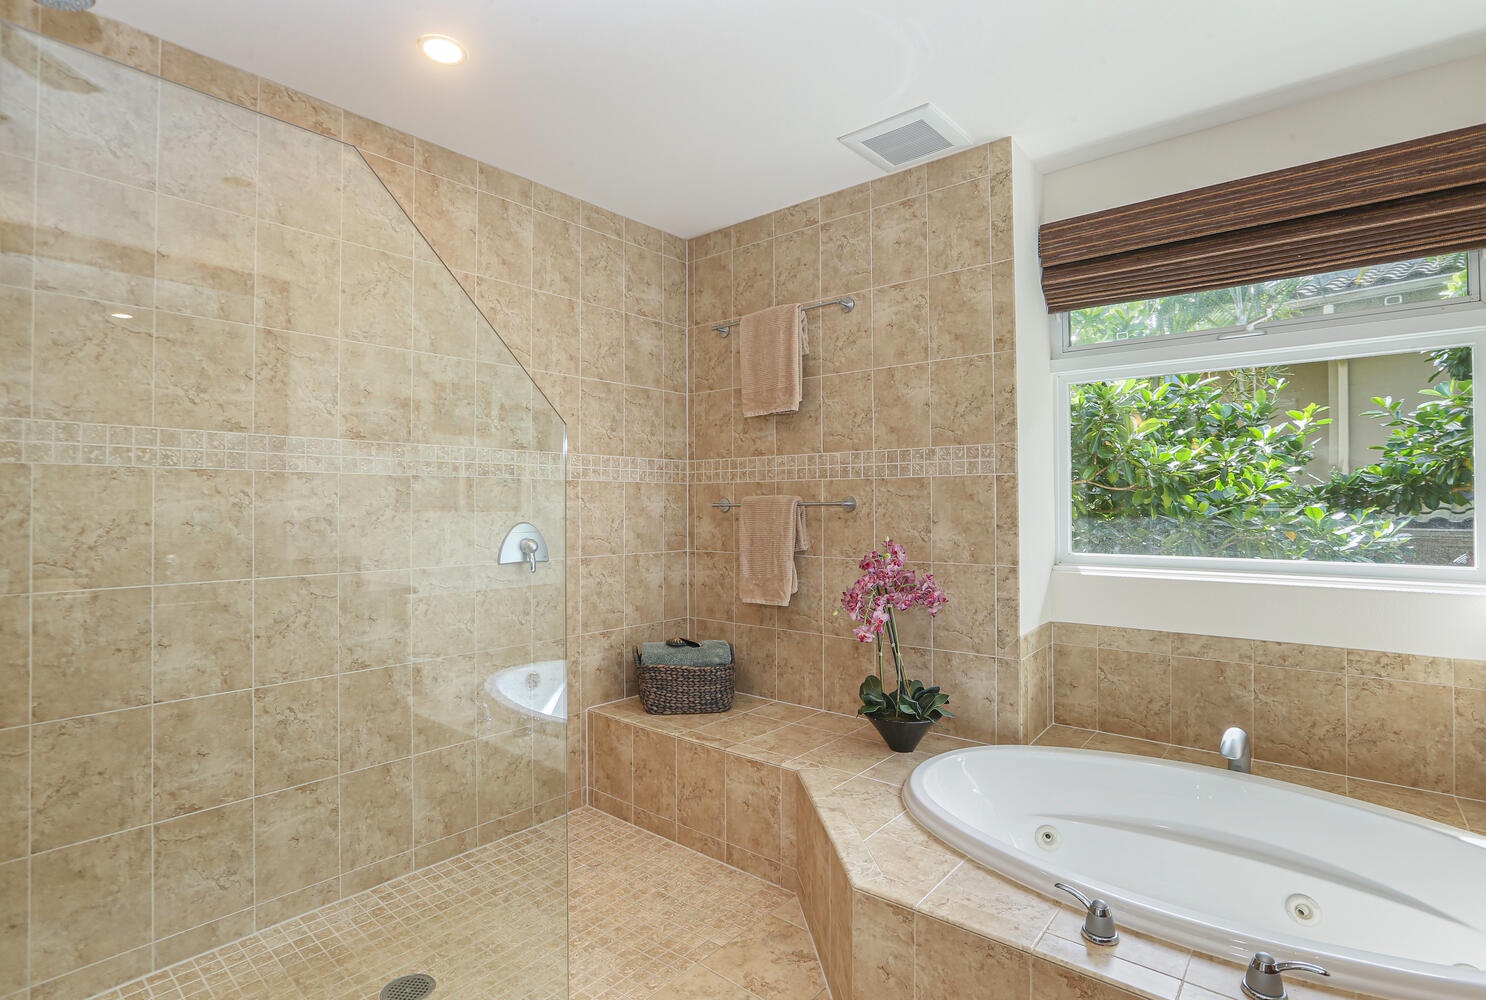 Princeville Vacation Rentals, Hale Moana - Jacuzzi tub and walk-in shower in the primary bedroom's ensuite bathroom